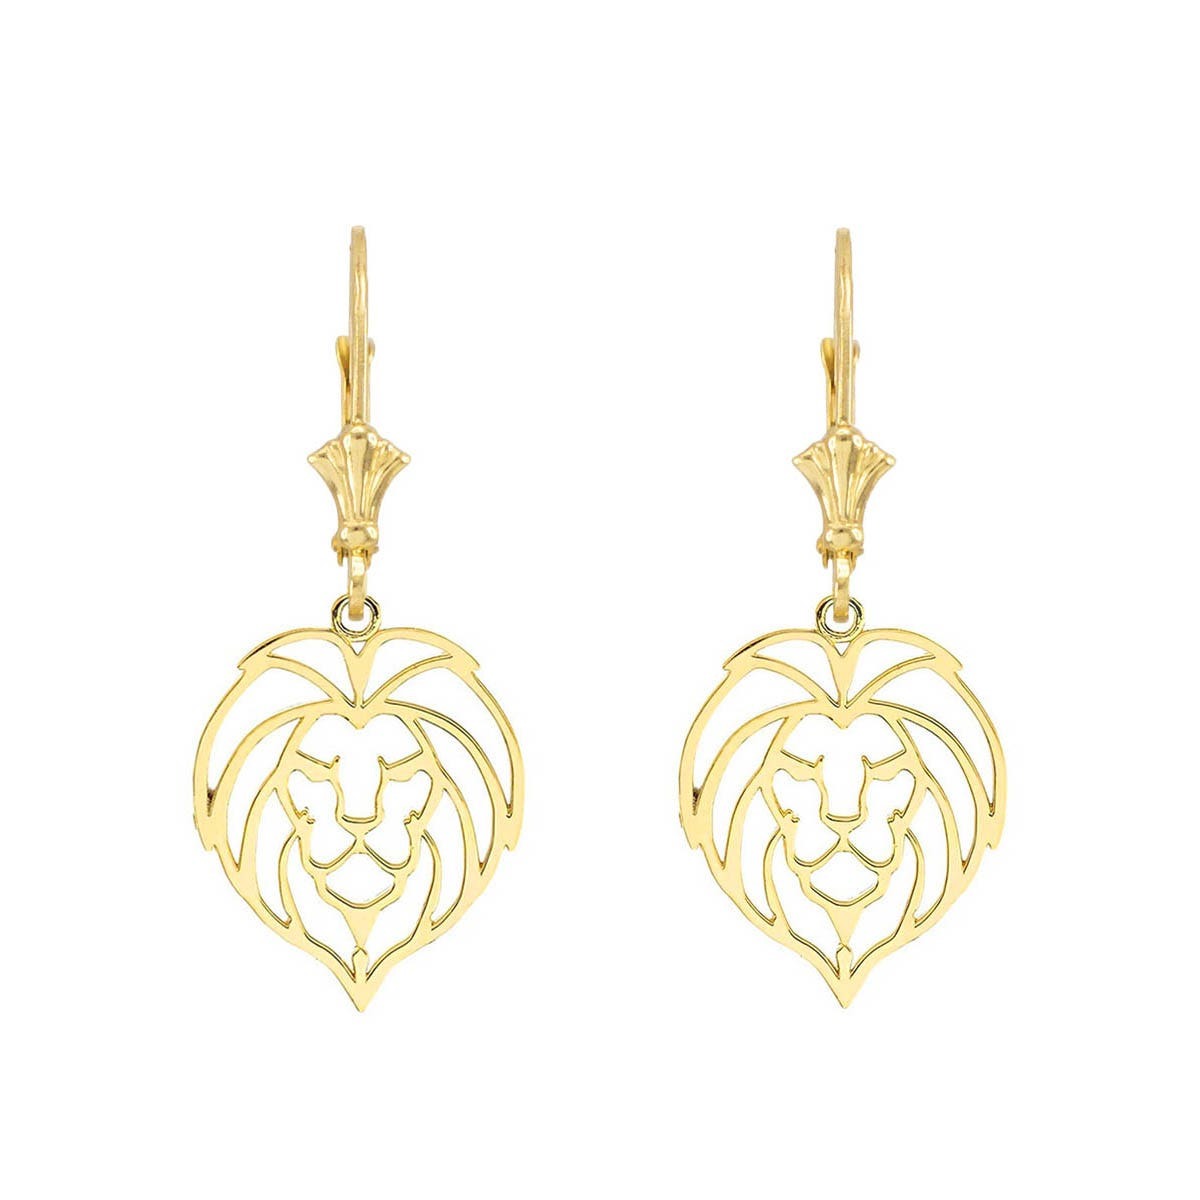 Gents Gold Earrings from Gold Boutique GOOFASH